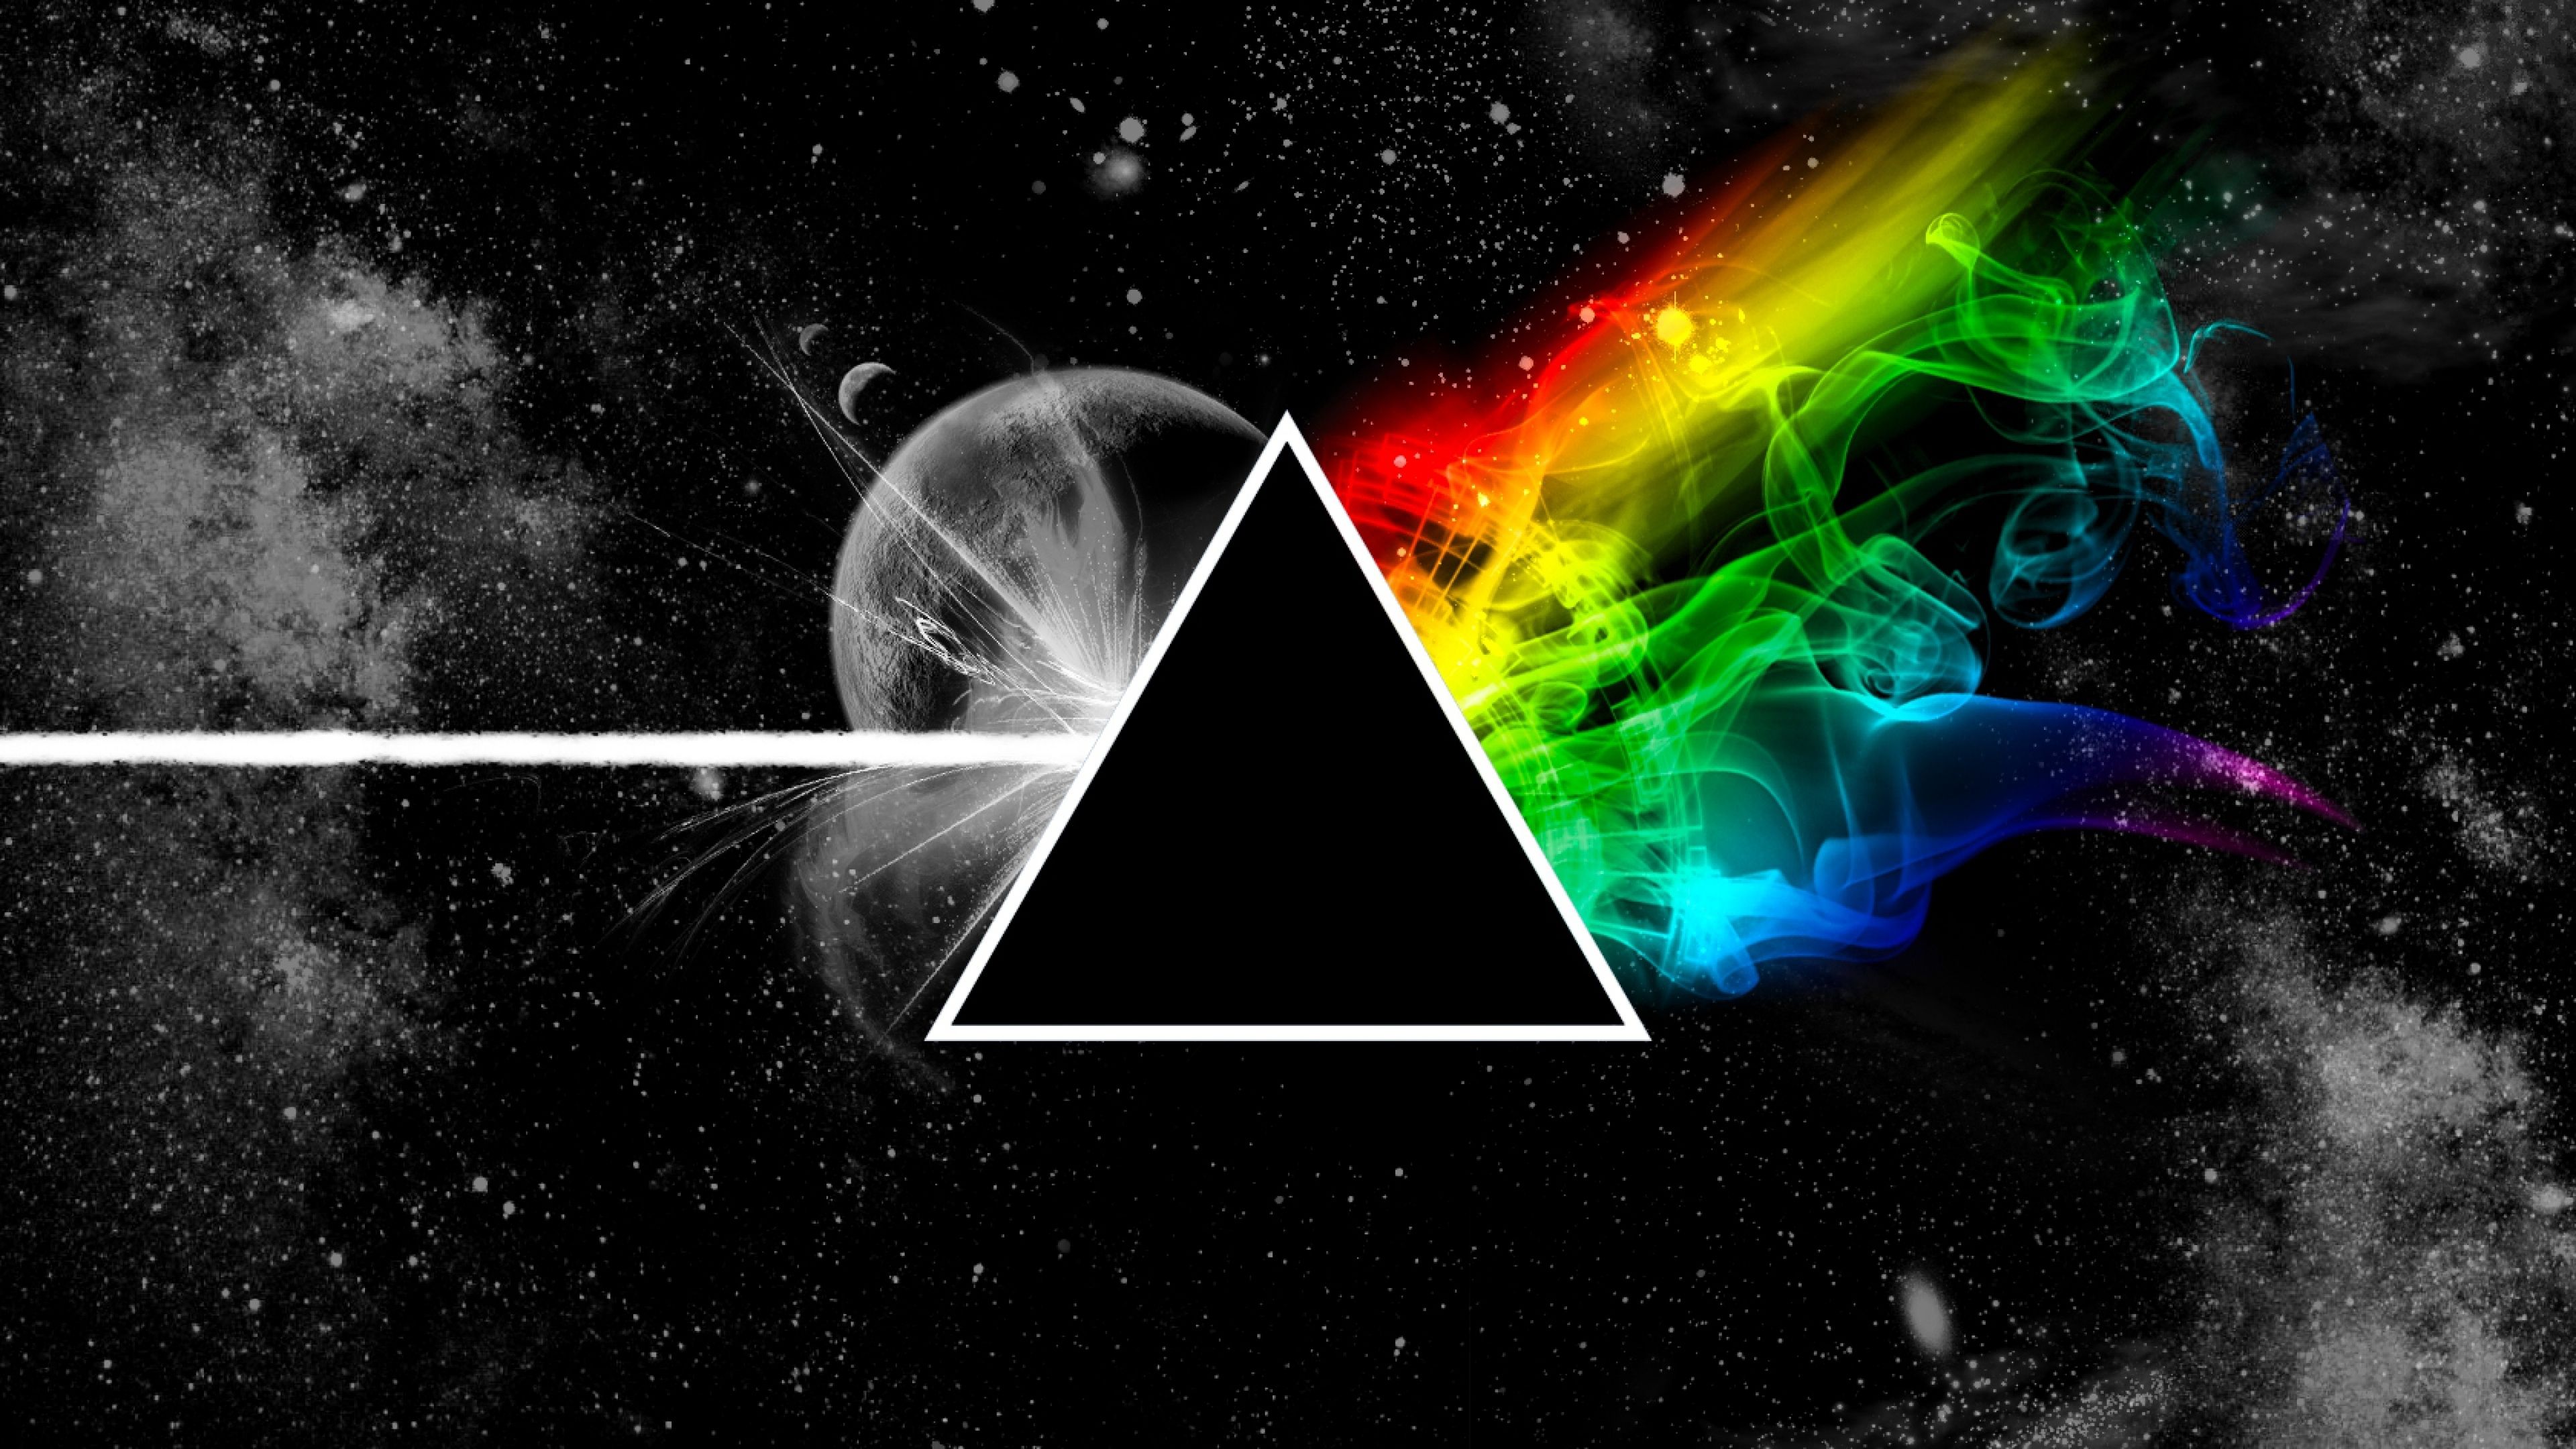 Download Wallpaper 3840x2160 Pink floyd, Triangle, Space, Planet ...